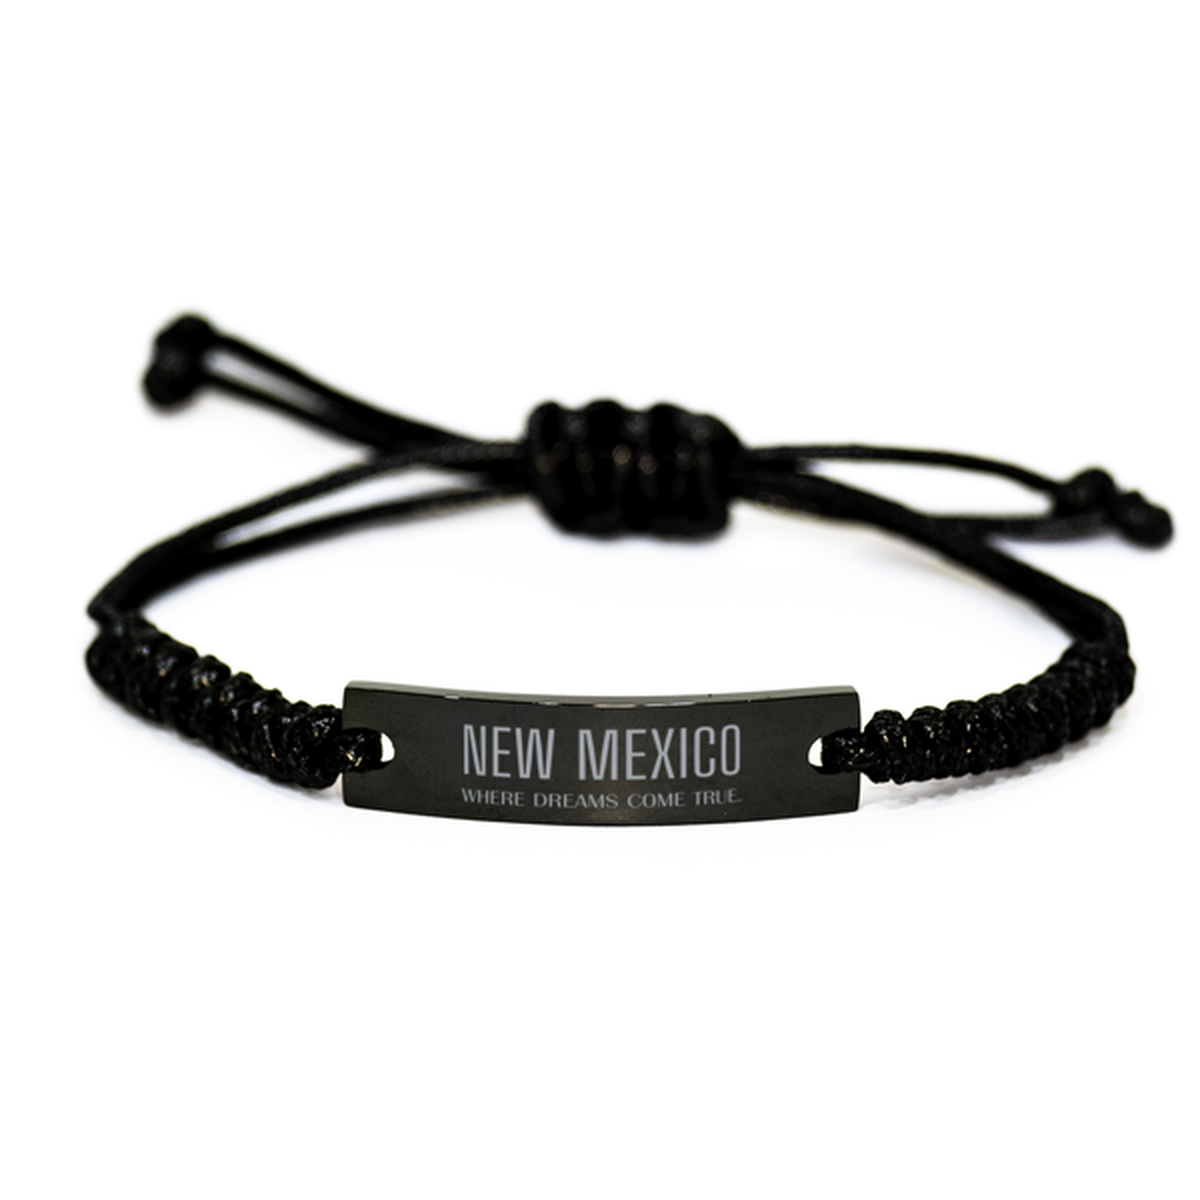 Love New Mexico State Black Rope Bracelet, New Mexico Where dreams come true, Birthday Inspirational Gifts For New Mexico Men, Women, Friends